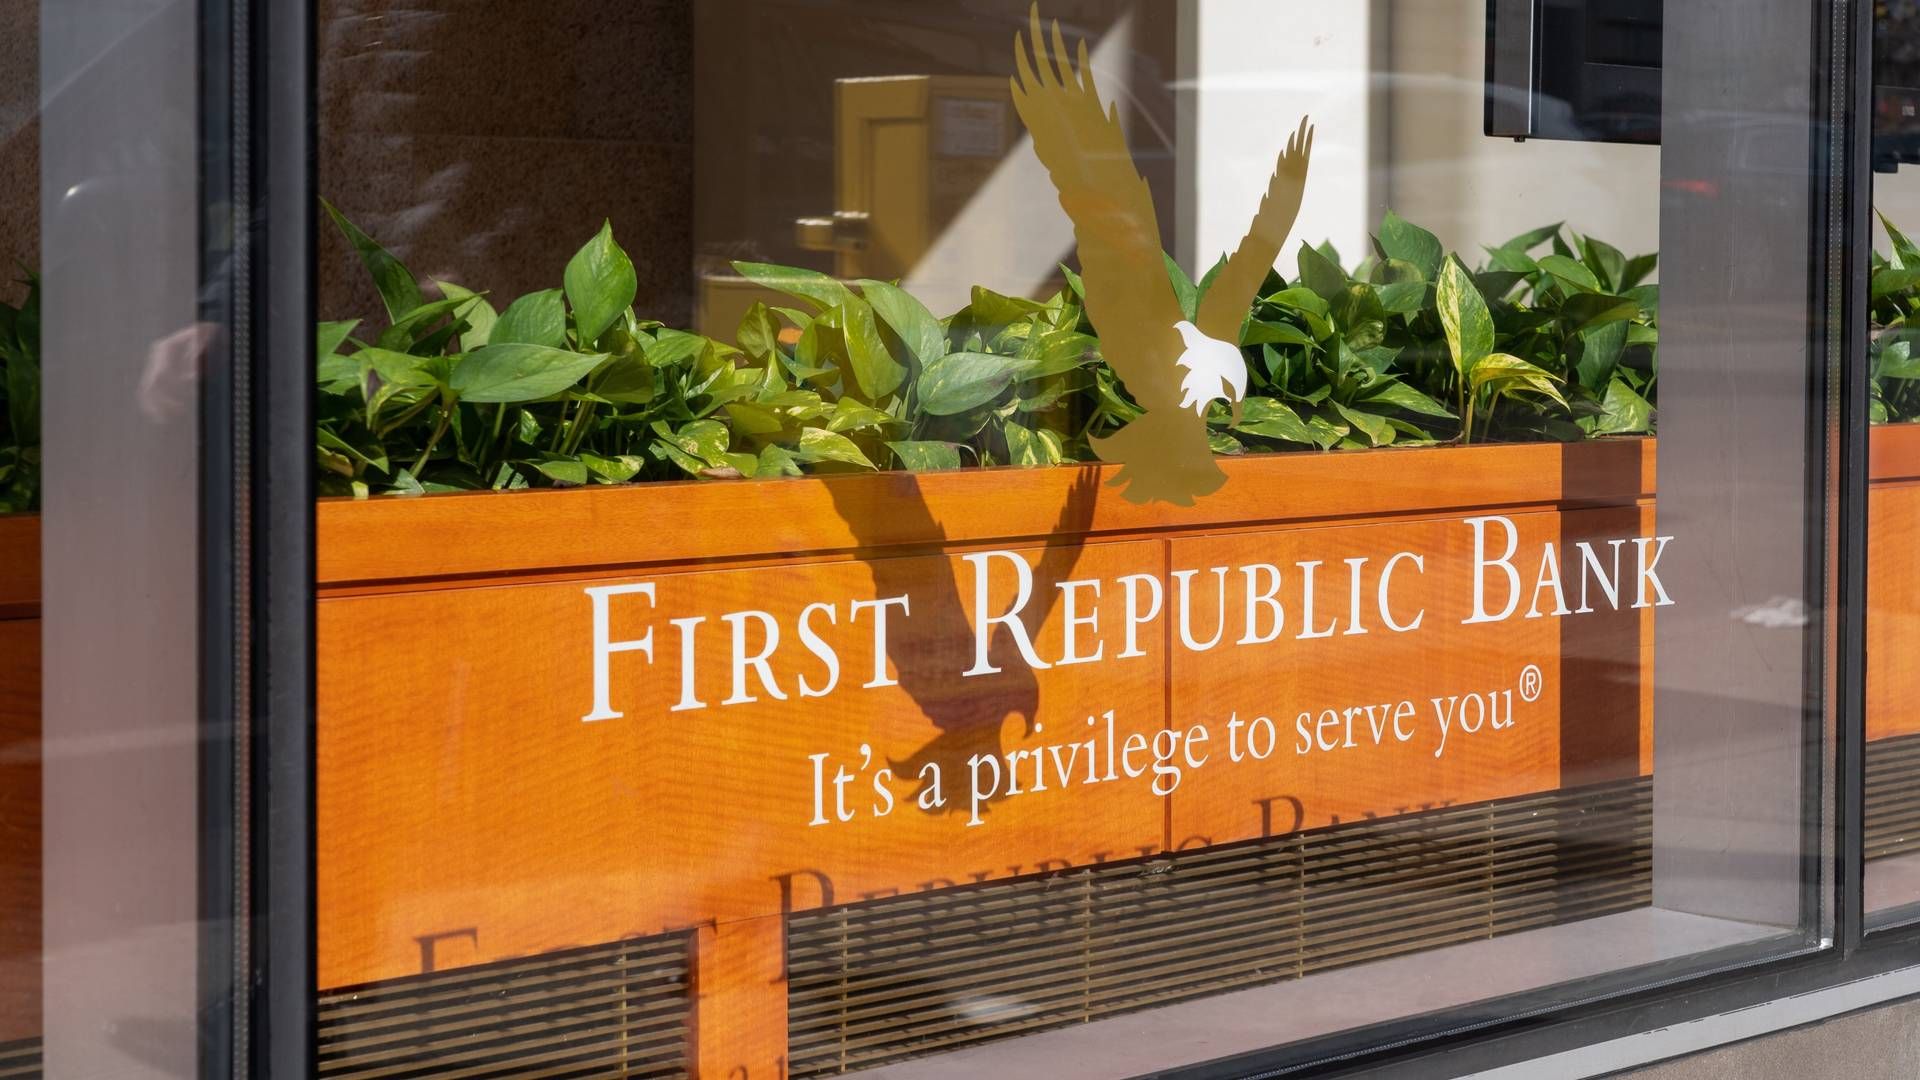 The eagle has landed: Filiale der First Republic Bank in New York. | Foto: picture alliance / ZUMAPRESS.com | M10s